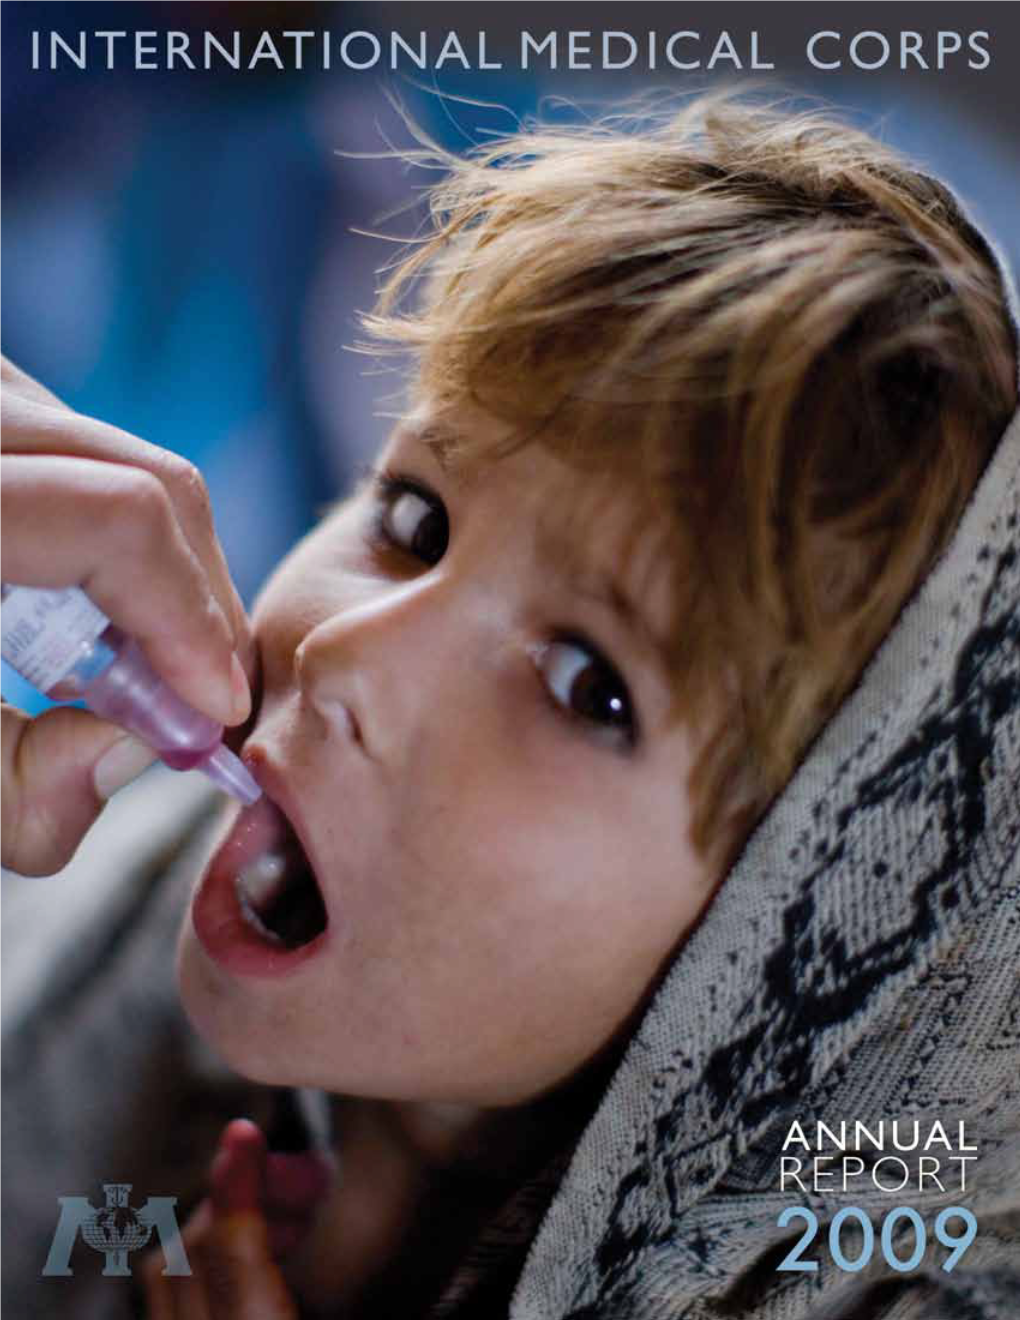 Annual Report and Accounts Are Available on Request from International Medical Corps-UK